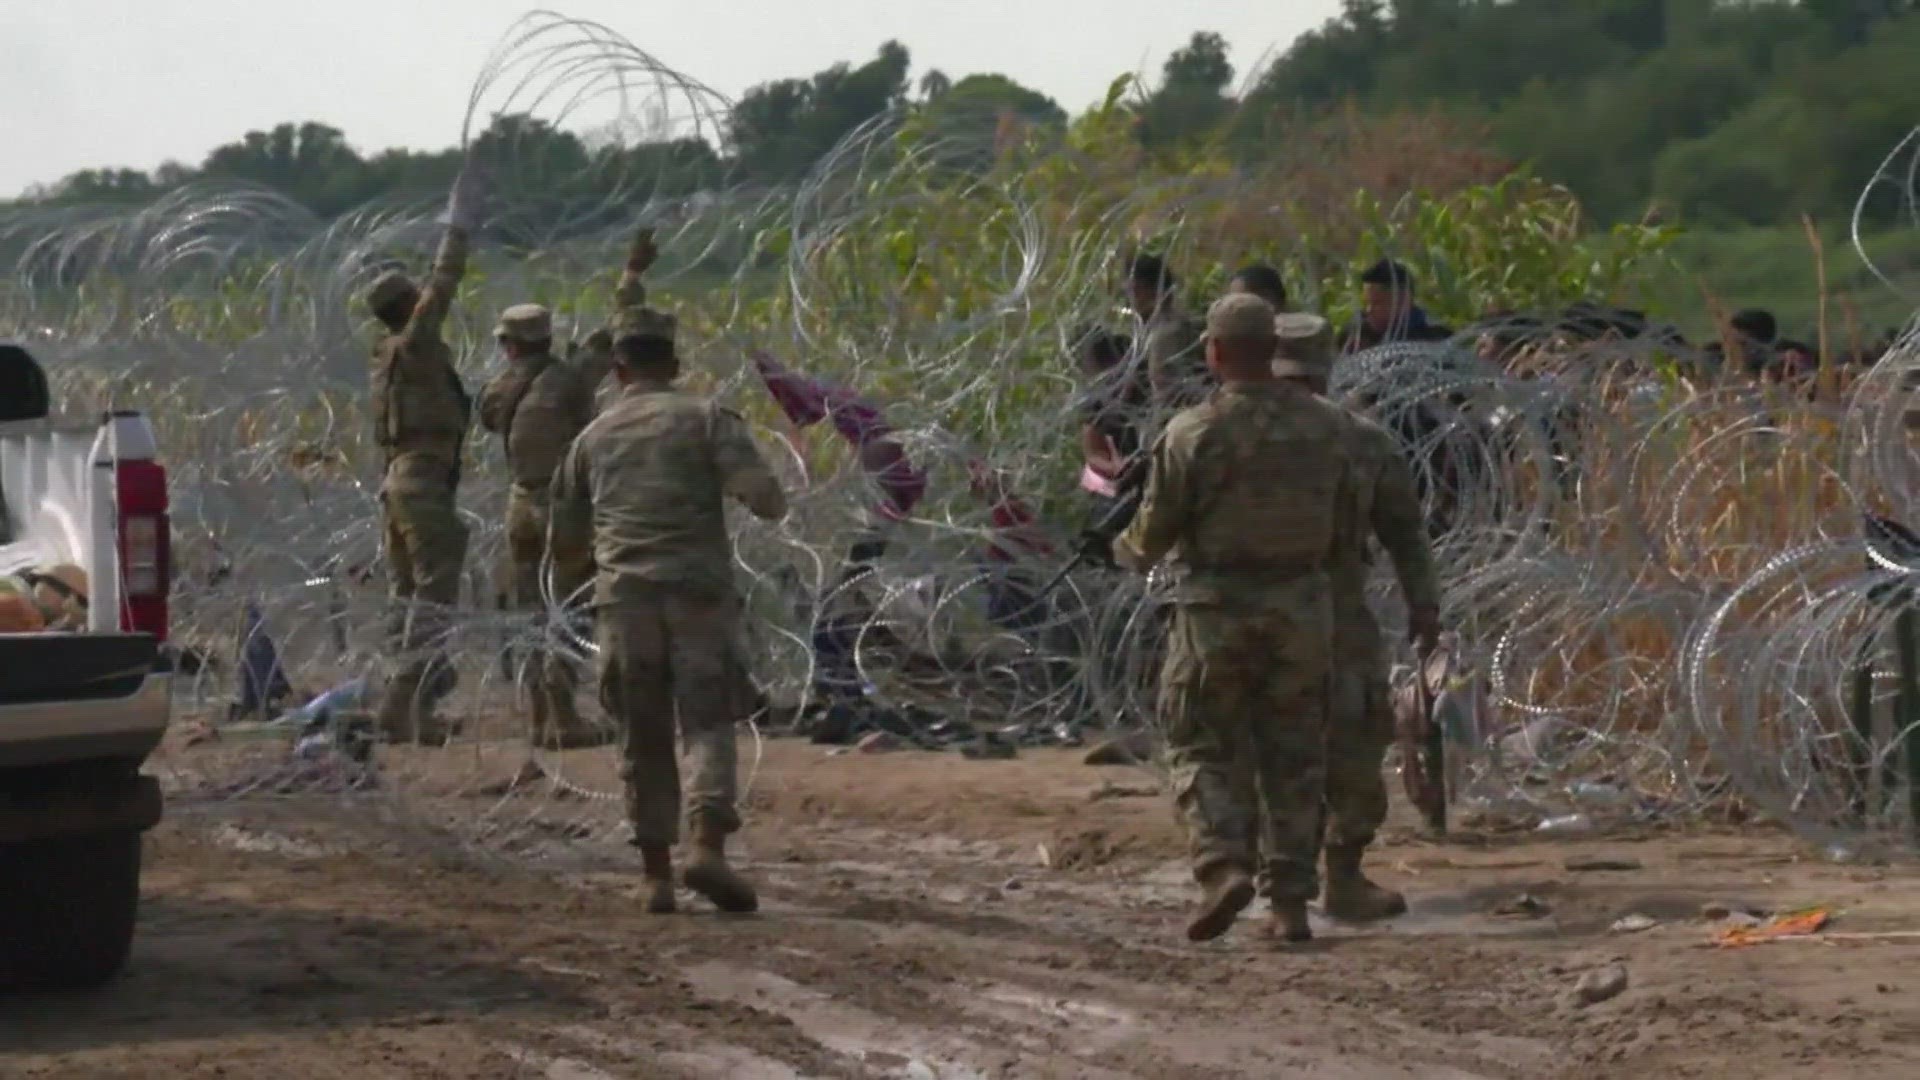 The razor wire was installed by Texas Gov. Greg Abbott as part of Operation Lone Star to deter migrants from entering the state.